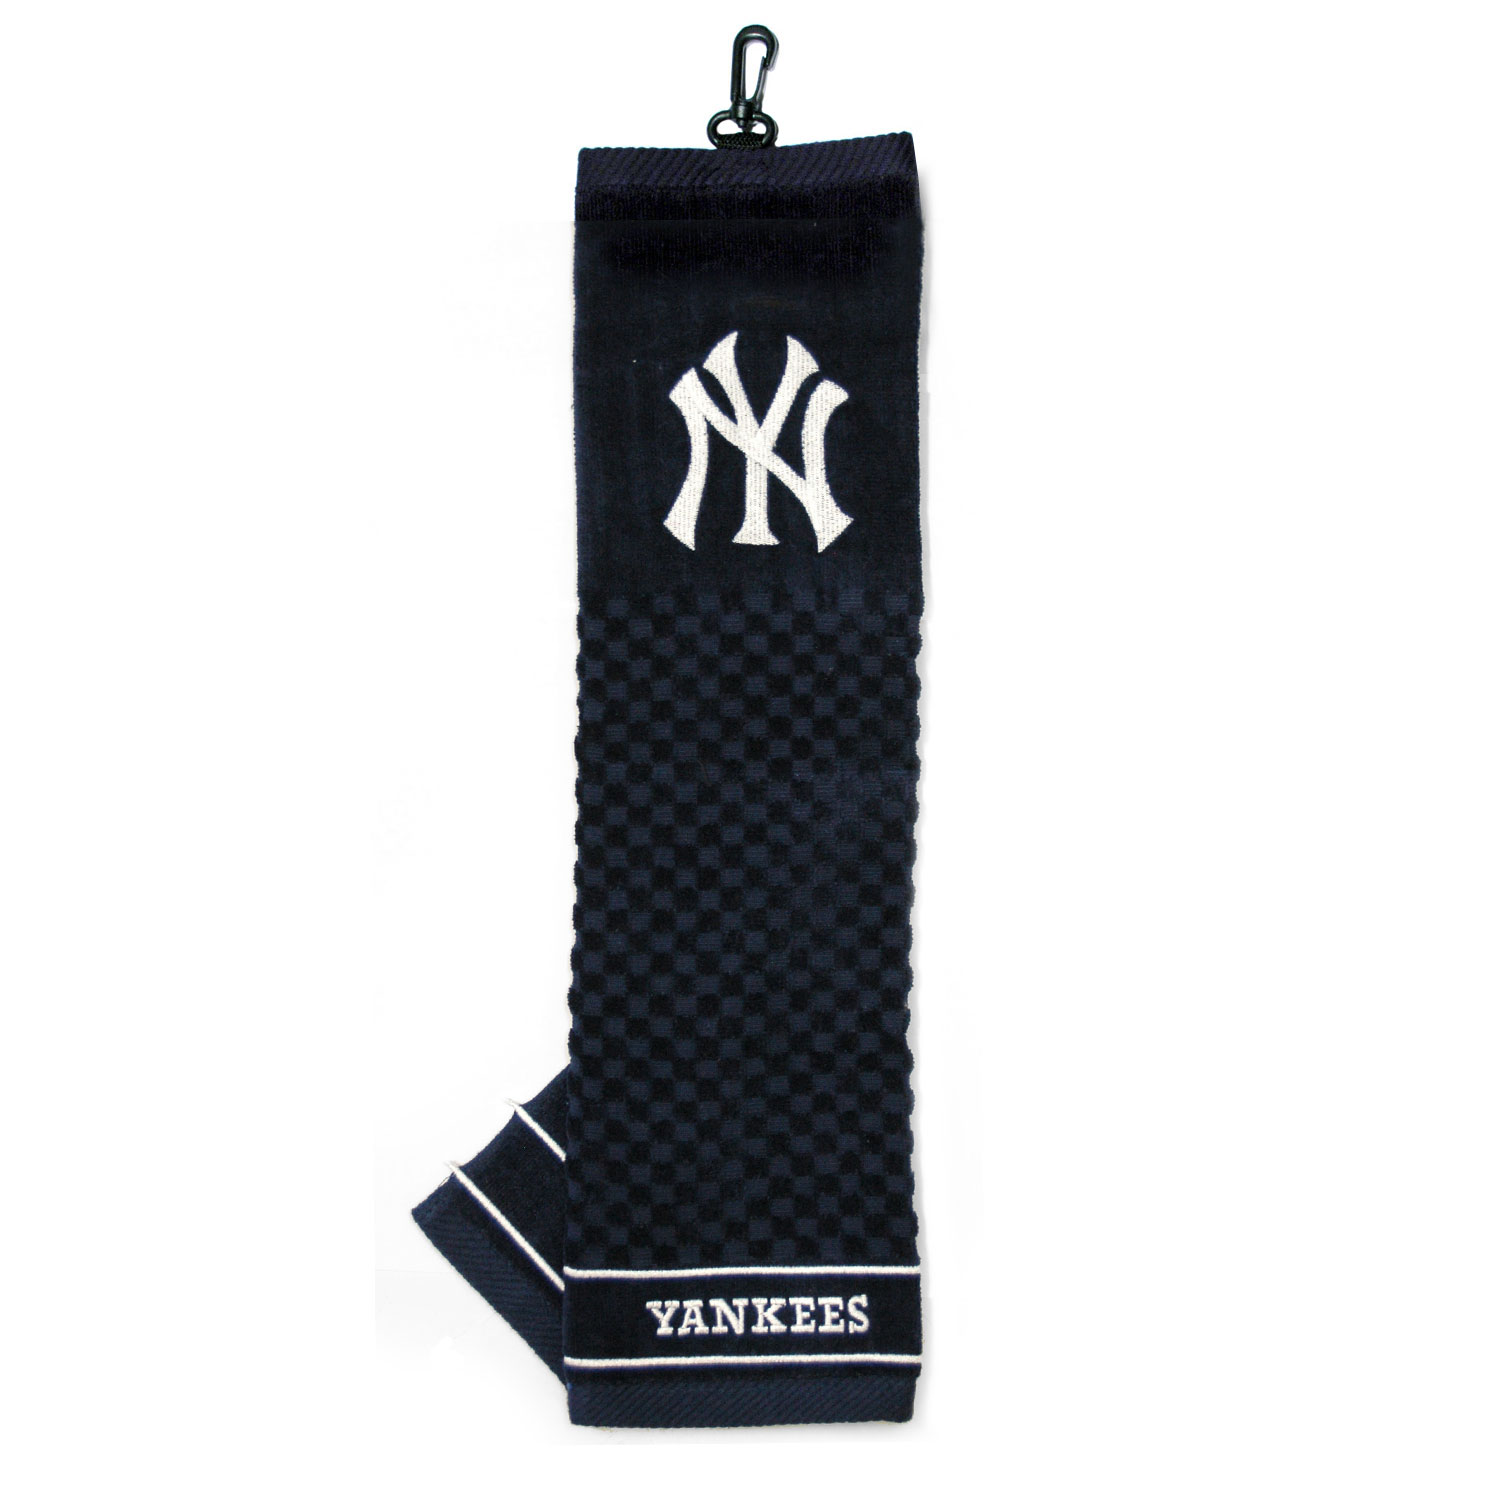 New York Yankees Embroidered Towel